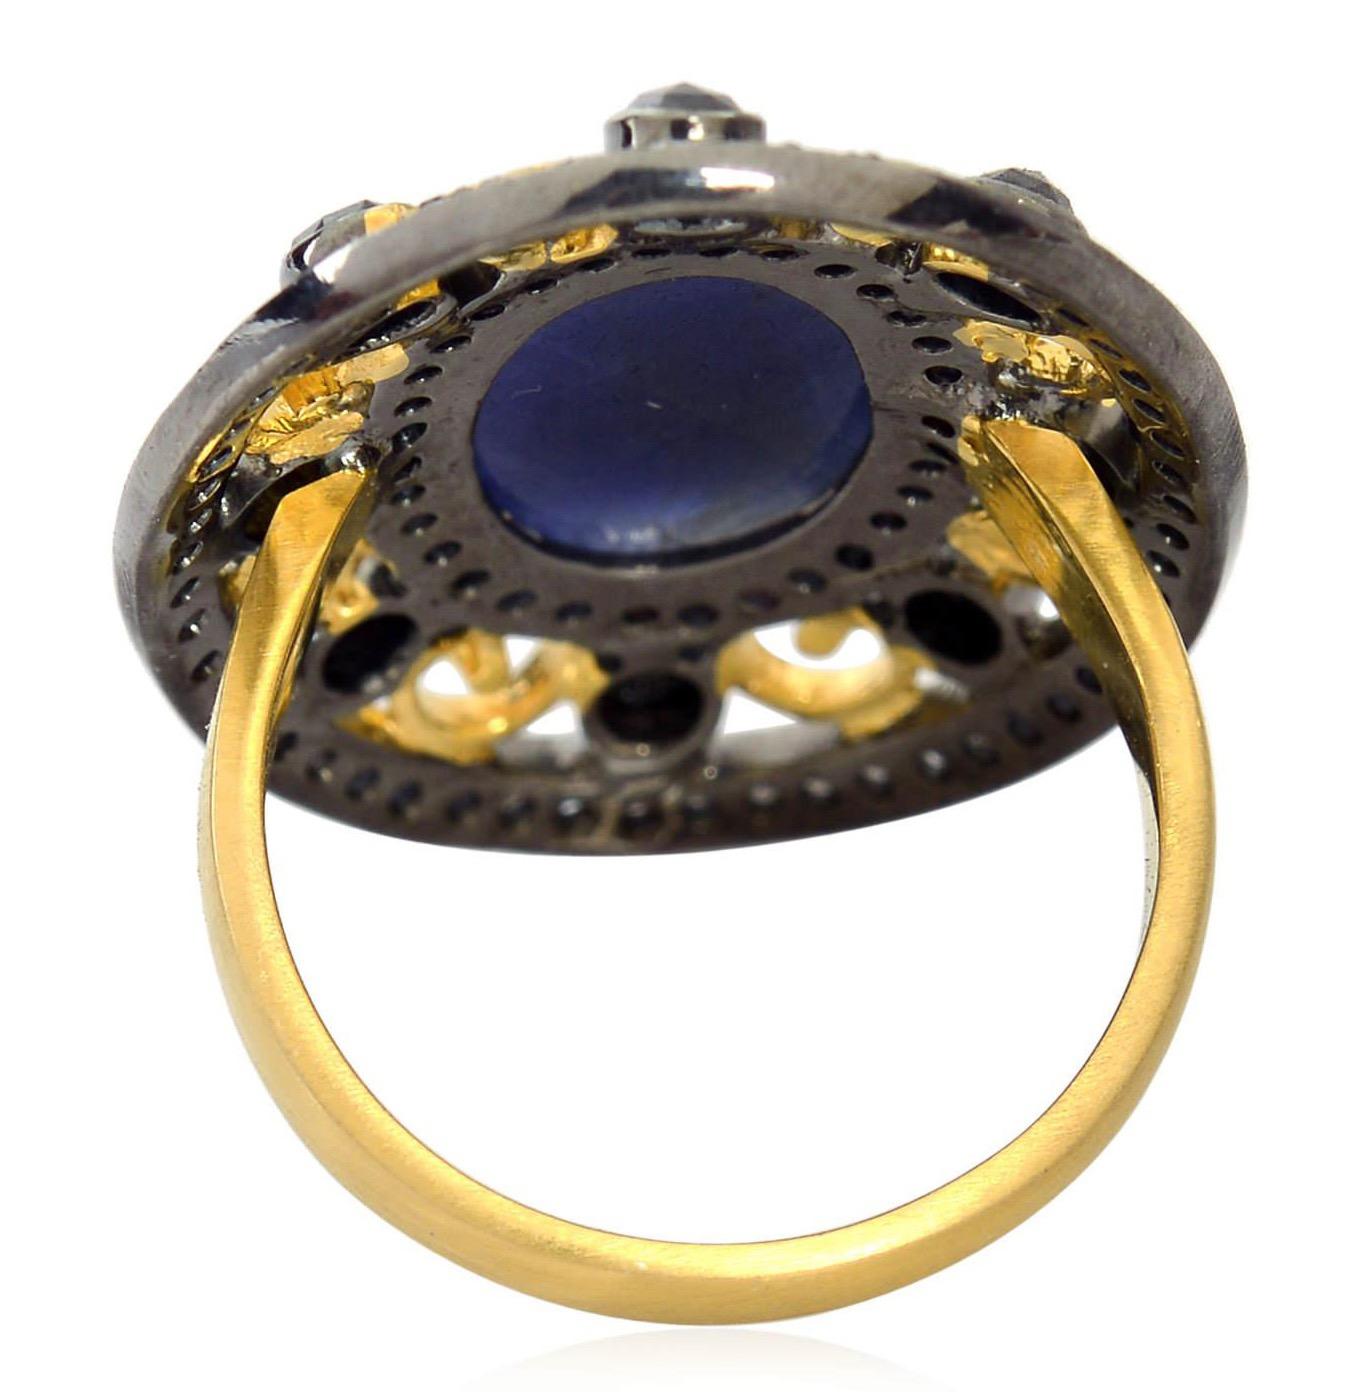 This ring has been meticulously crafted from 18-karat gold & sterling silver with blackened finish. Handcrafted in 6.25 carats sapphire & illuminated with 1.57 carats diamonds. 

The ring is a size 7 and may be resized to larger or smaller upon